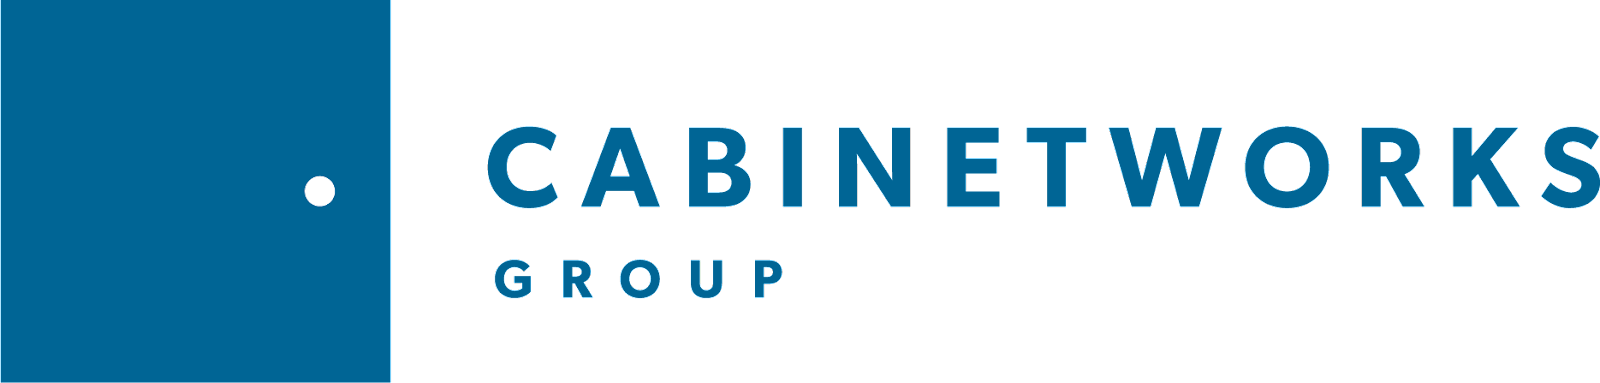 Cabinetworks group logo